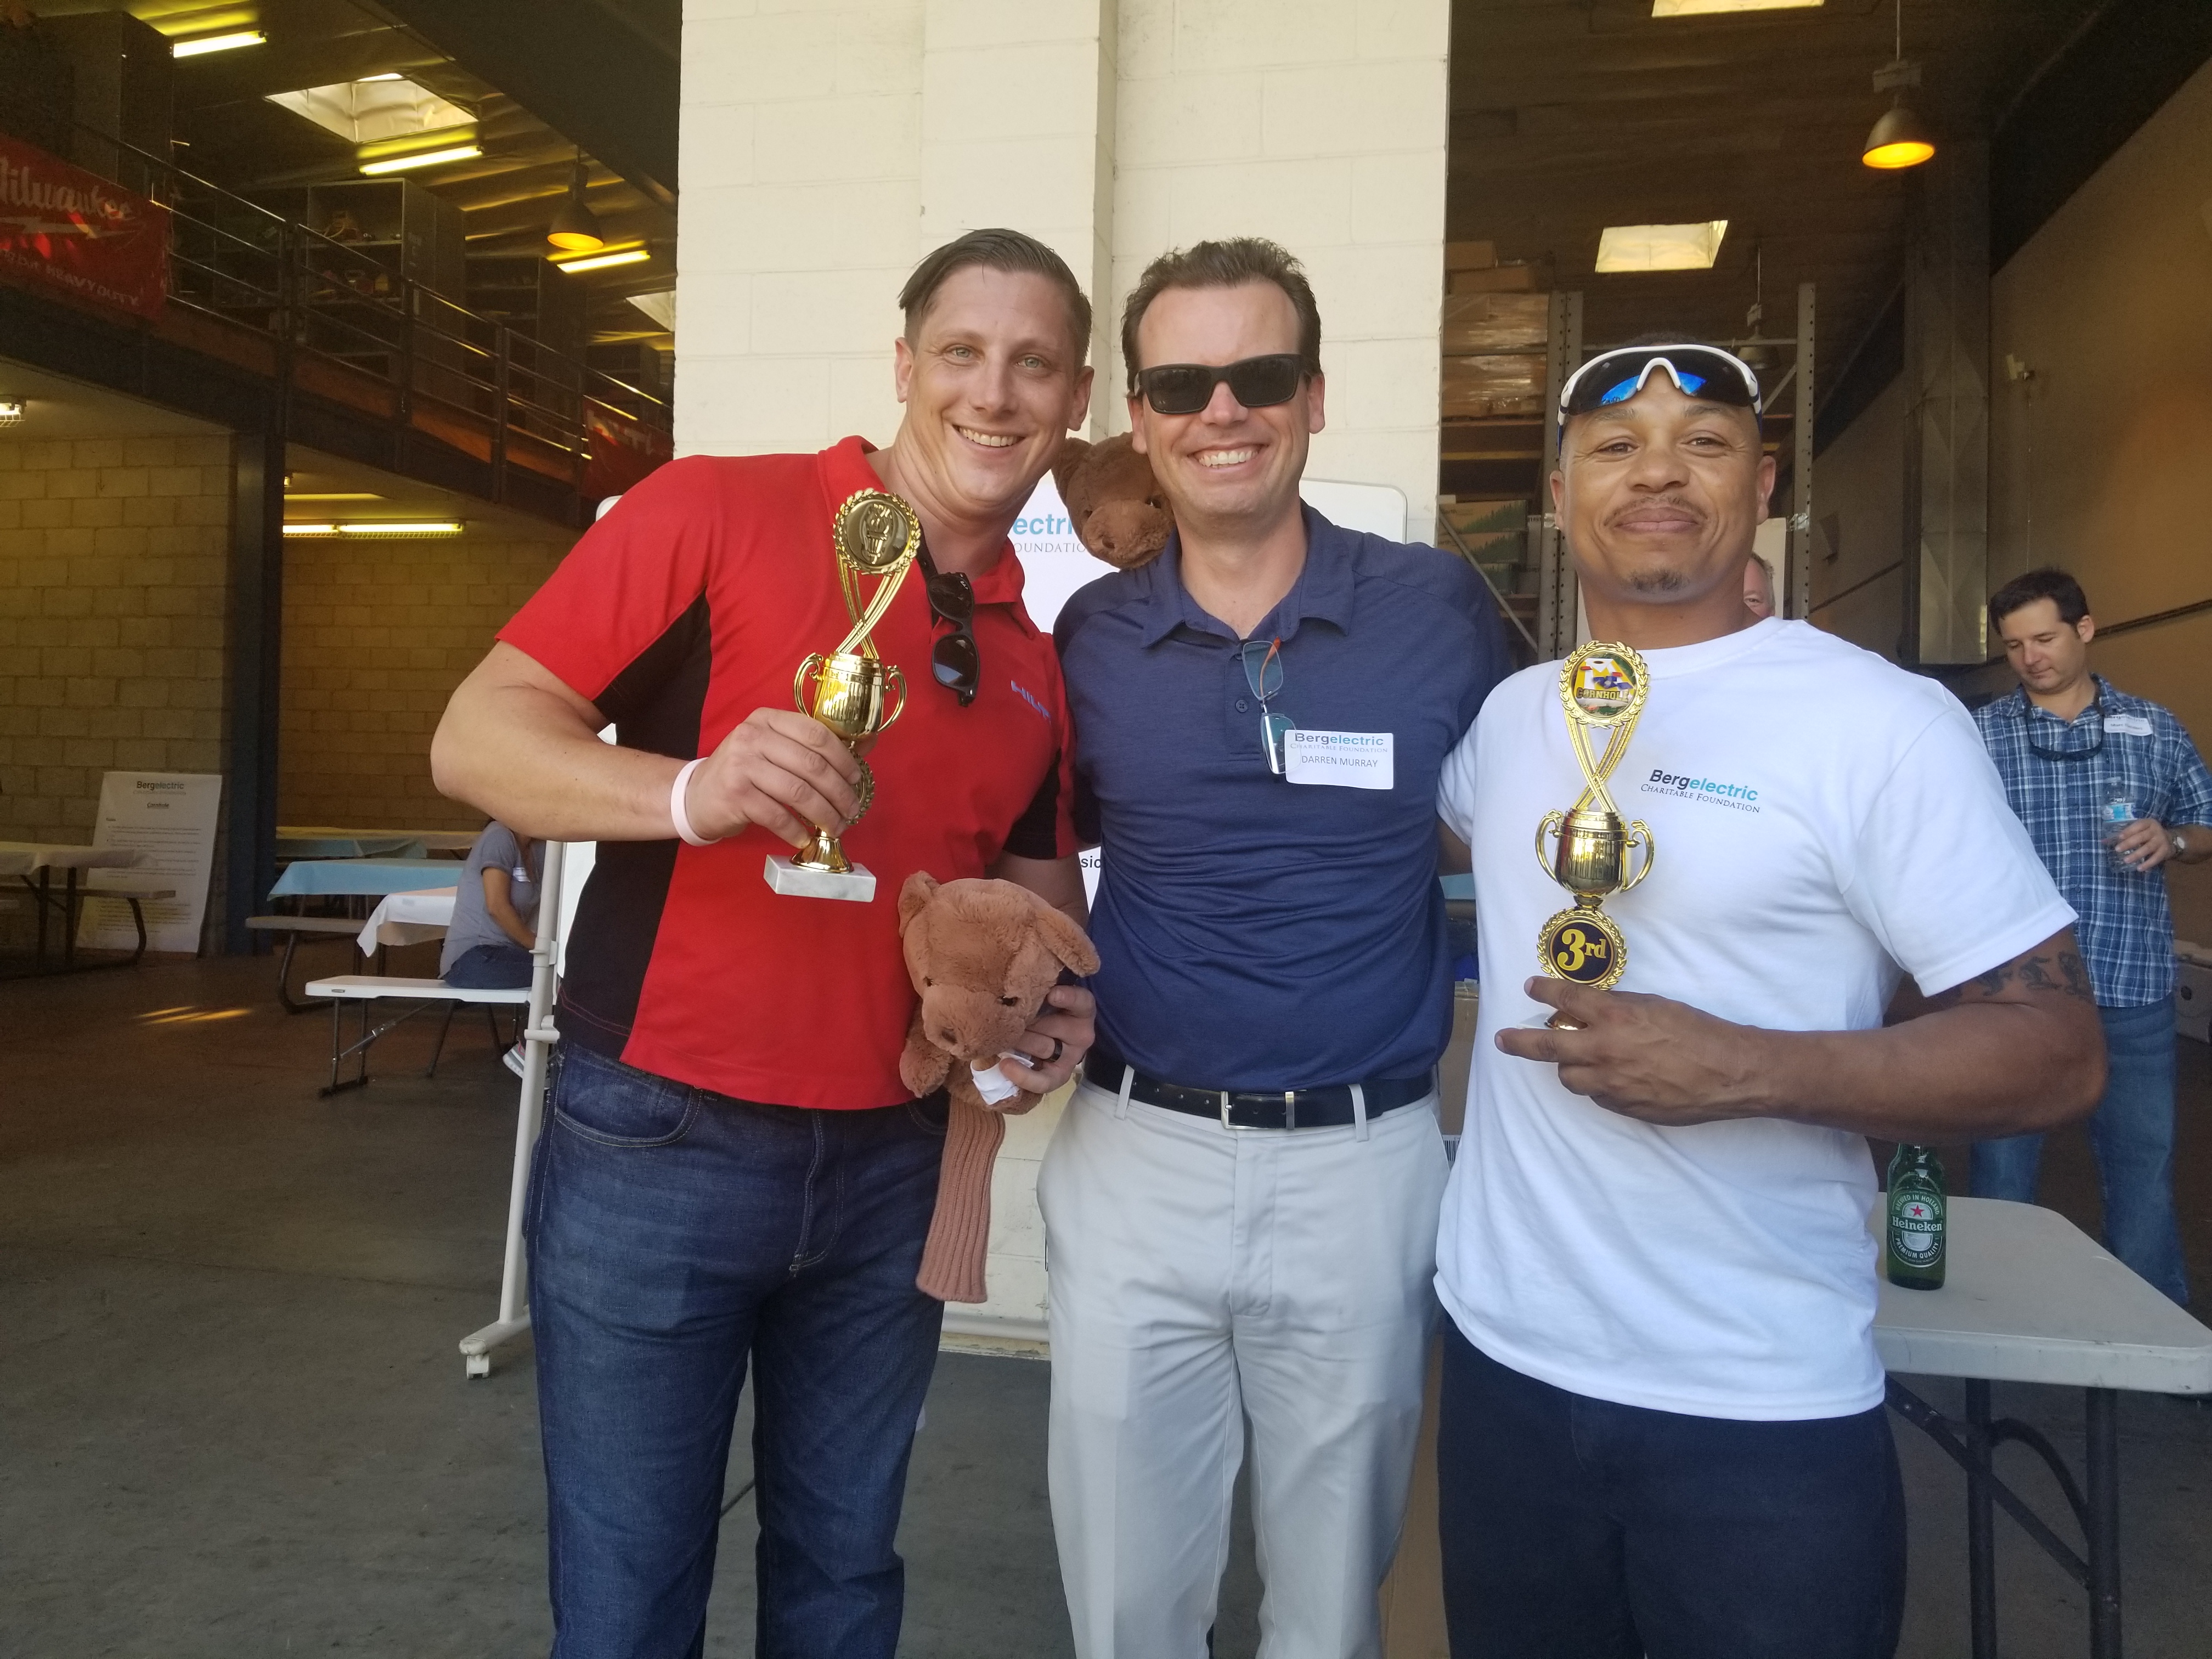 Los Angeles Hosted The 3rd Annual Cornhole Classic | Bergelectric Charitable Foundation